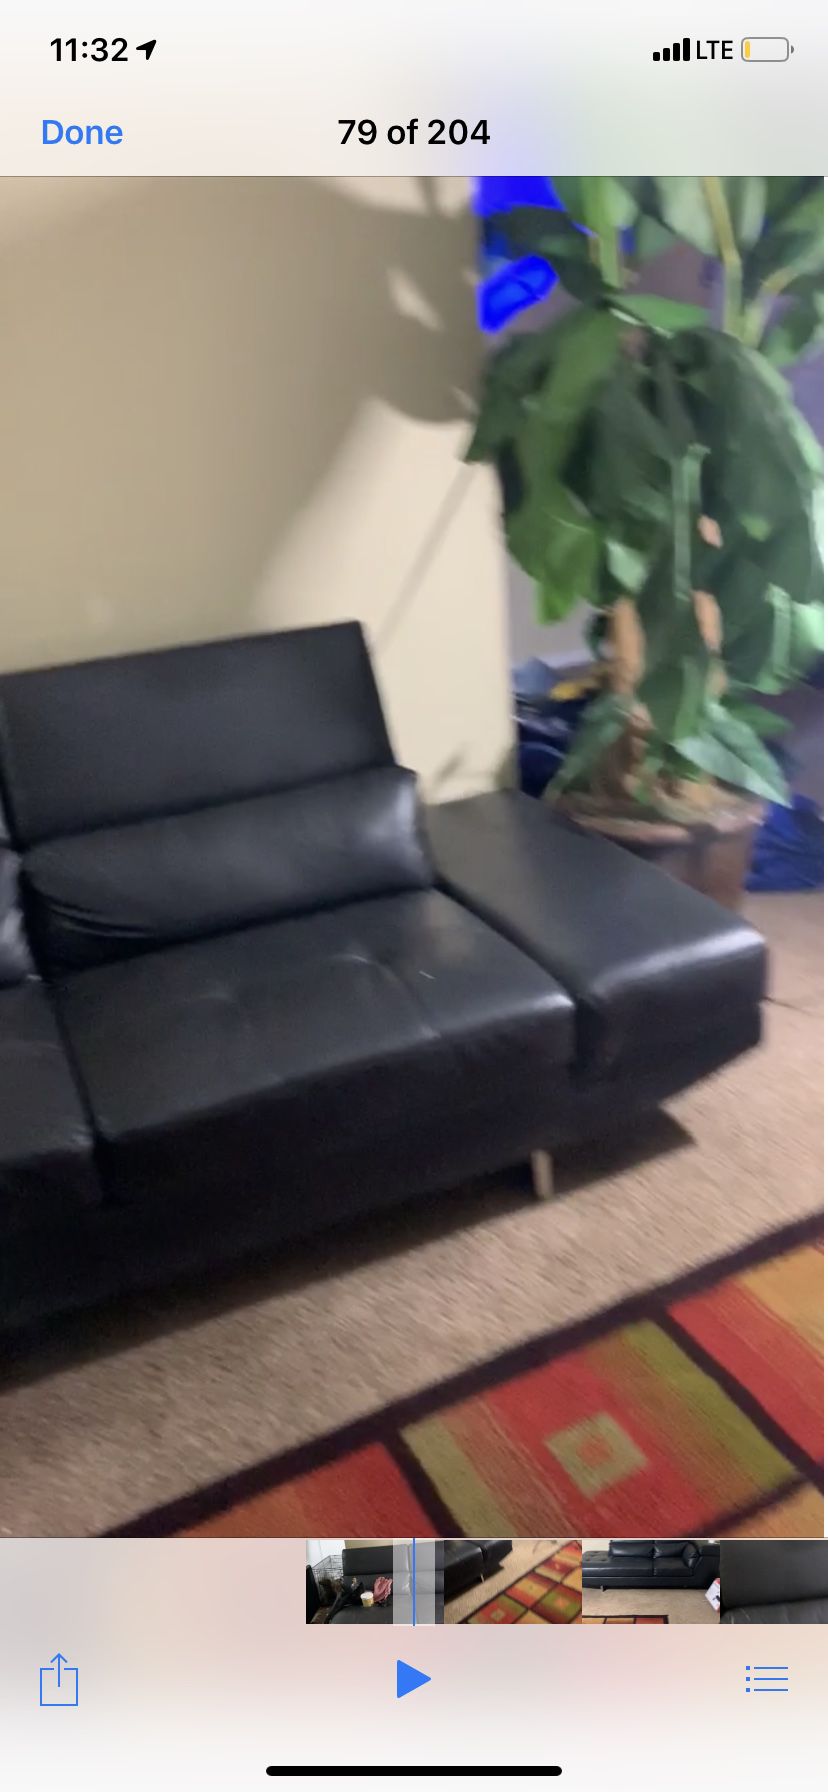 2 Torino black leather couches